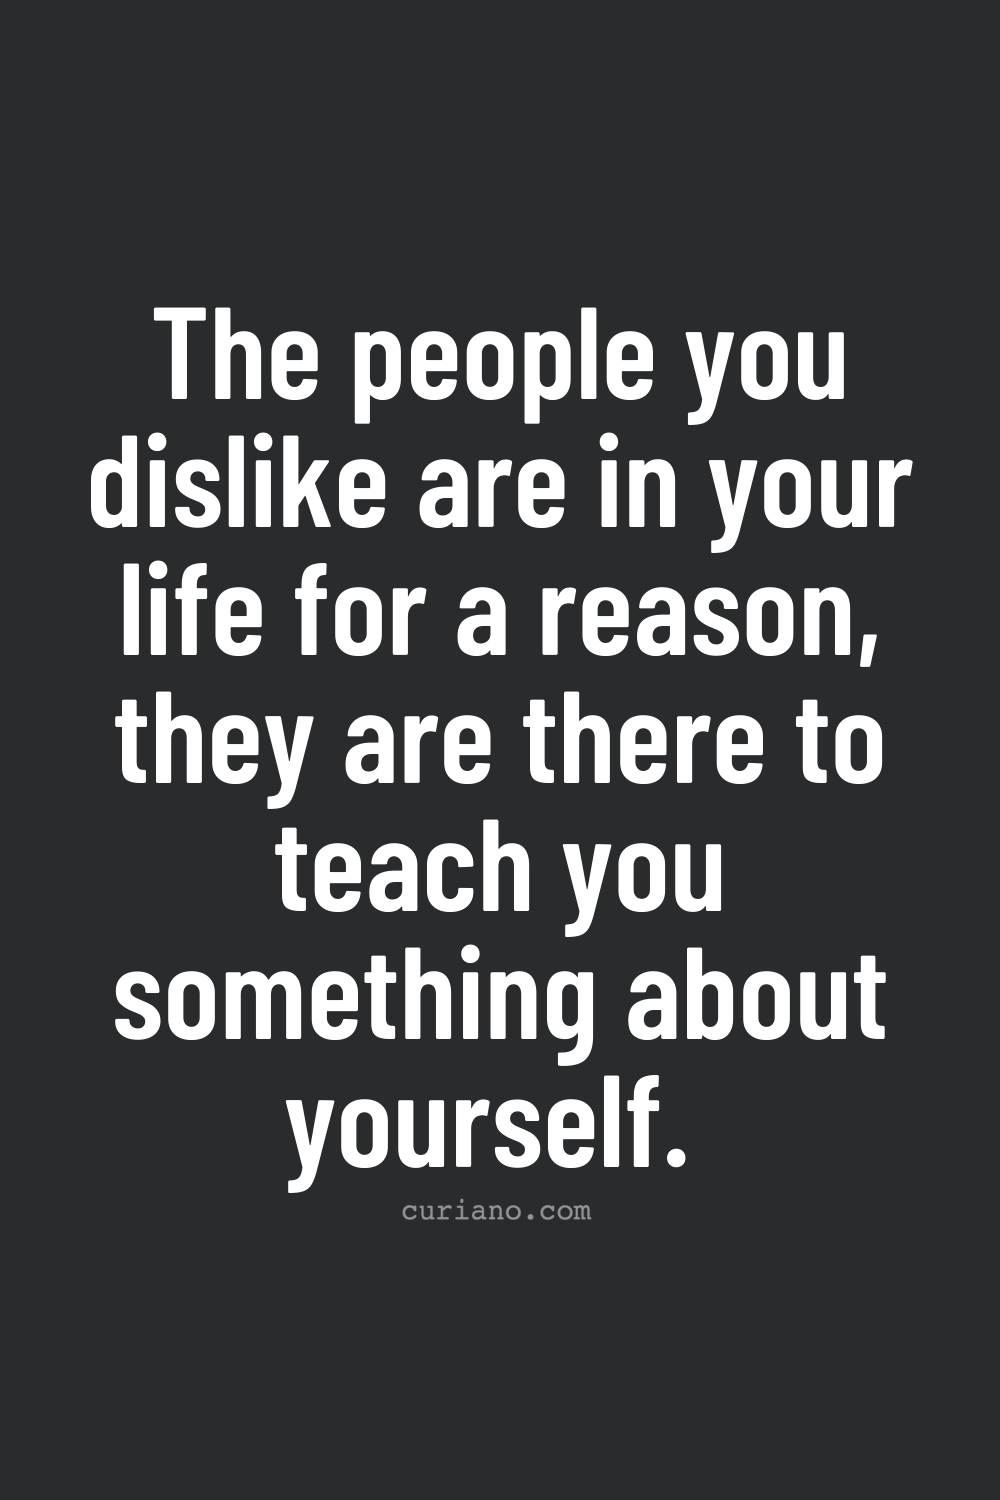 The people you dislike are in your life for a reason, they are there to teach you something about yourself.